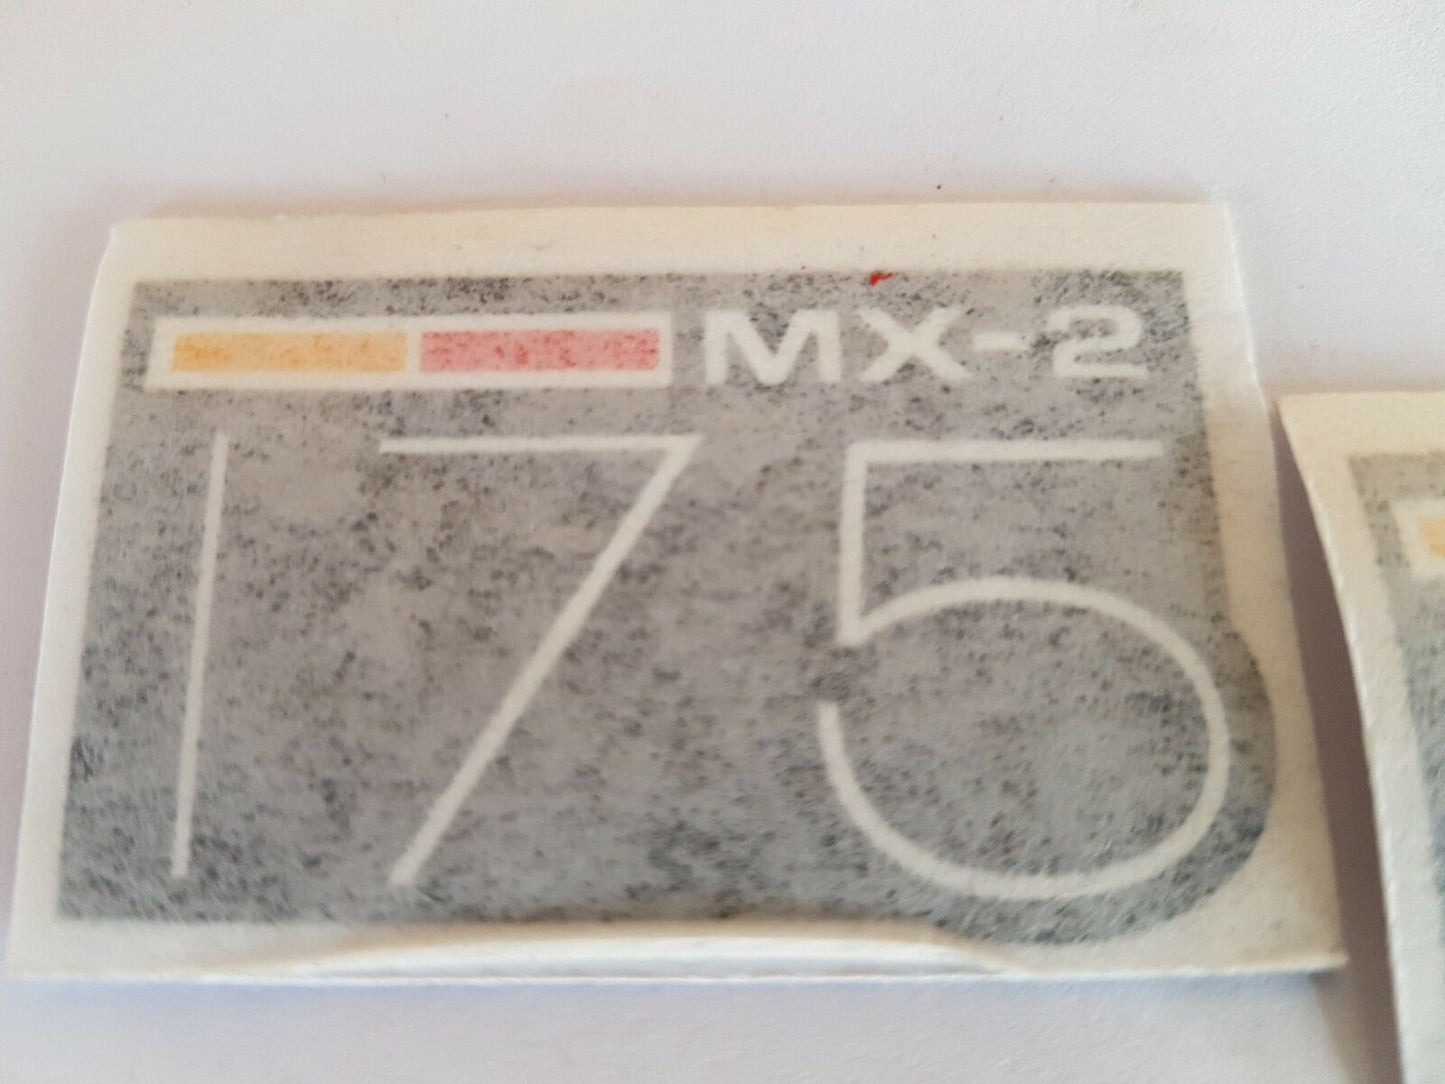 VINTAGE CAN-AM MX-2 175 SIDE COVER DECAL BOMBARDIER ROTAX